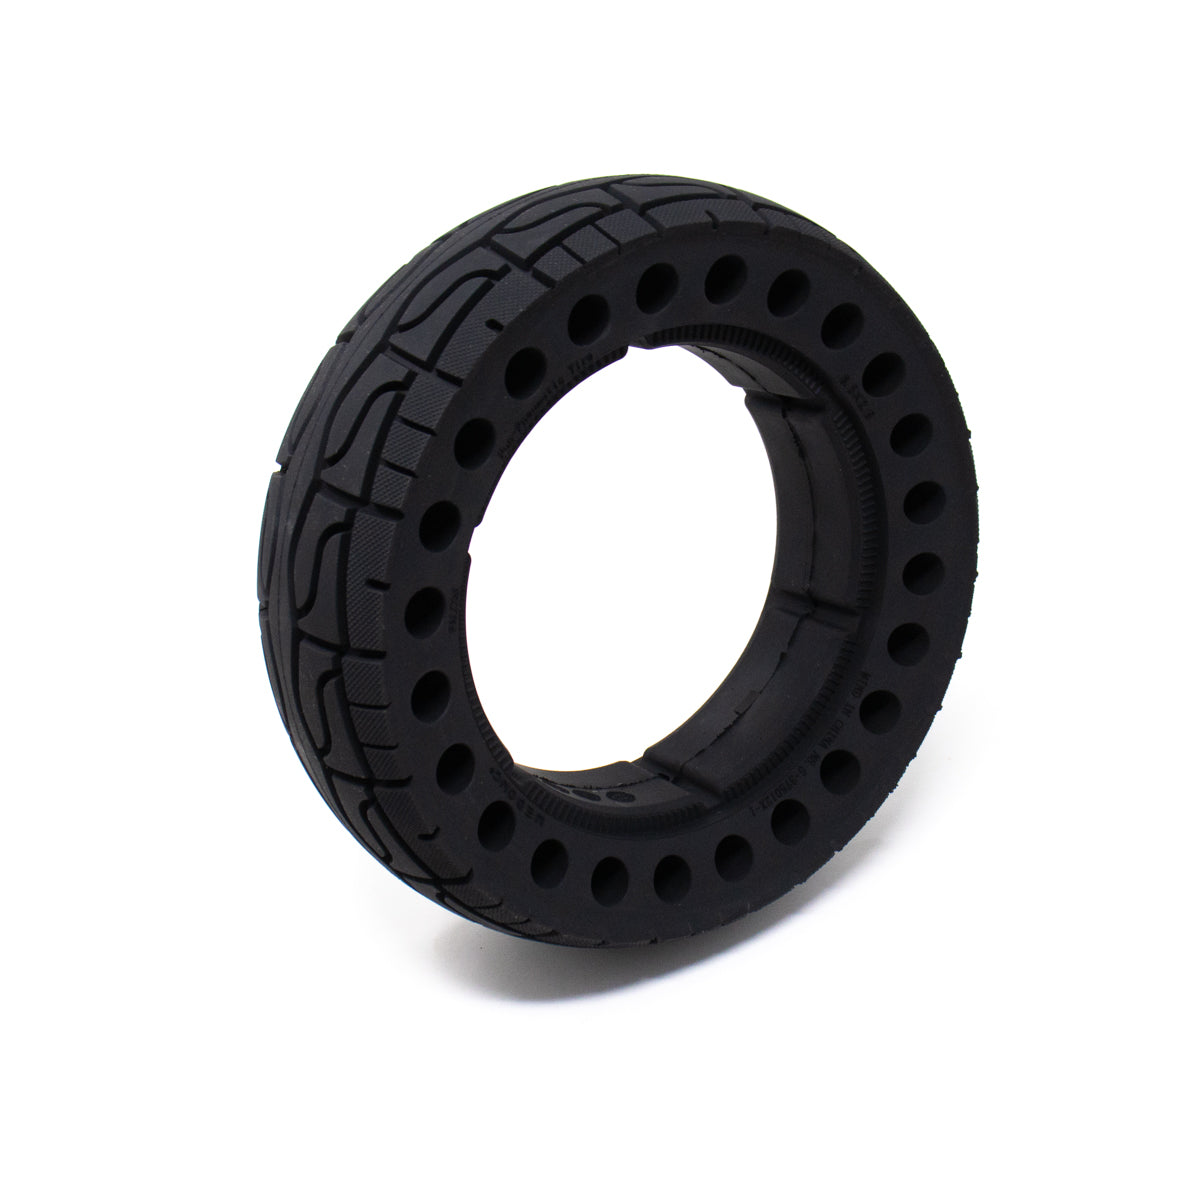 8.5x2.5" Solid Tire for VSETT 9+ Electric Scooters - REVRides